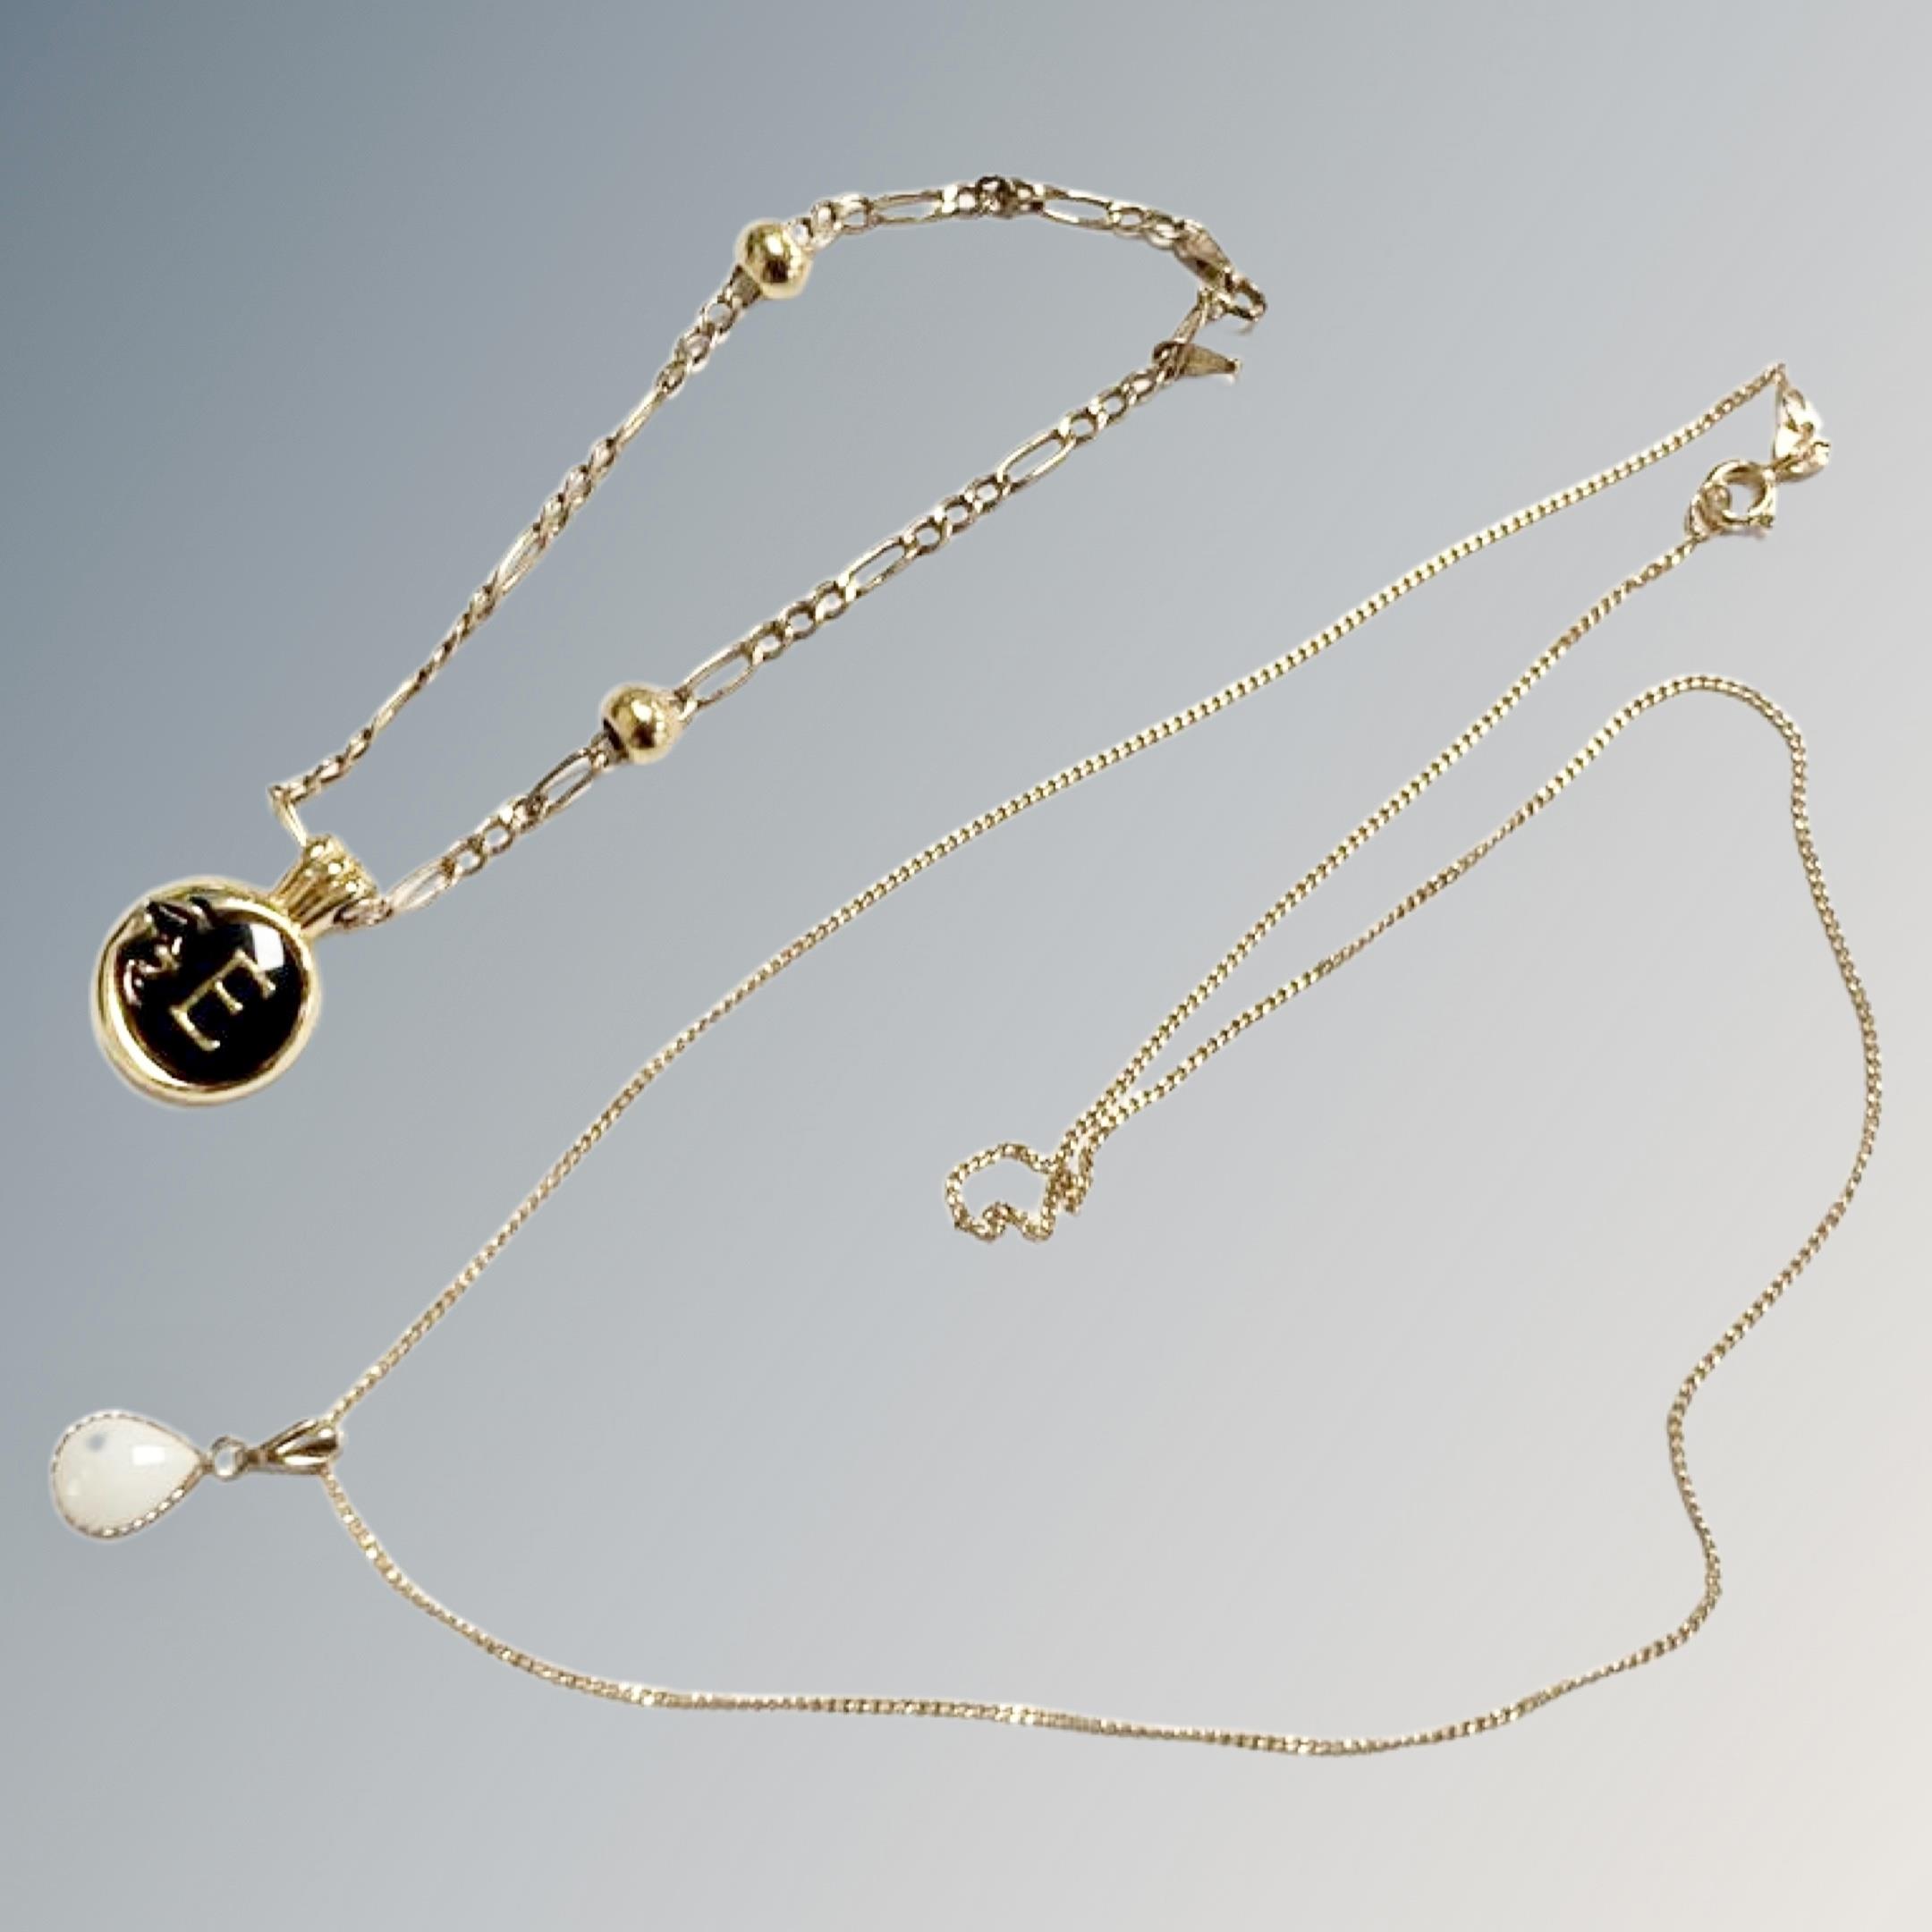 A 9ct yellow gold necklace with white opal pendant together with a further 9ct gold bracelet with